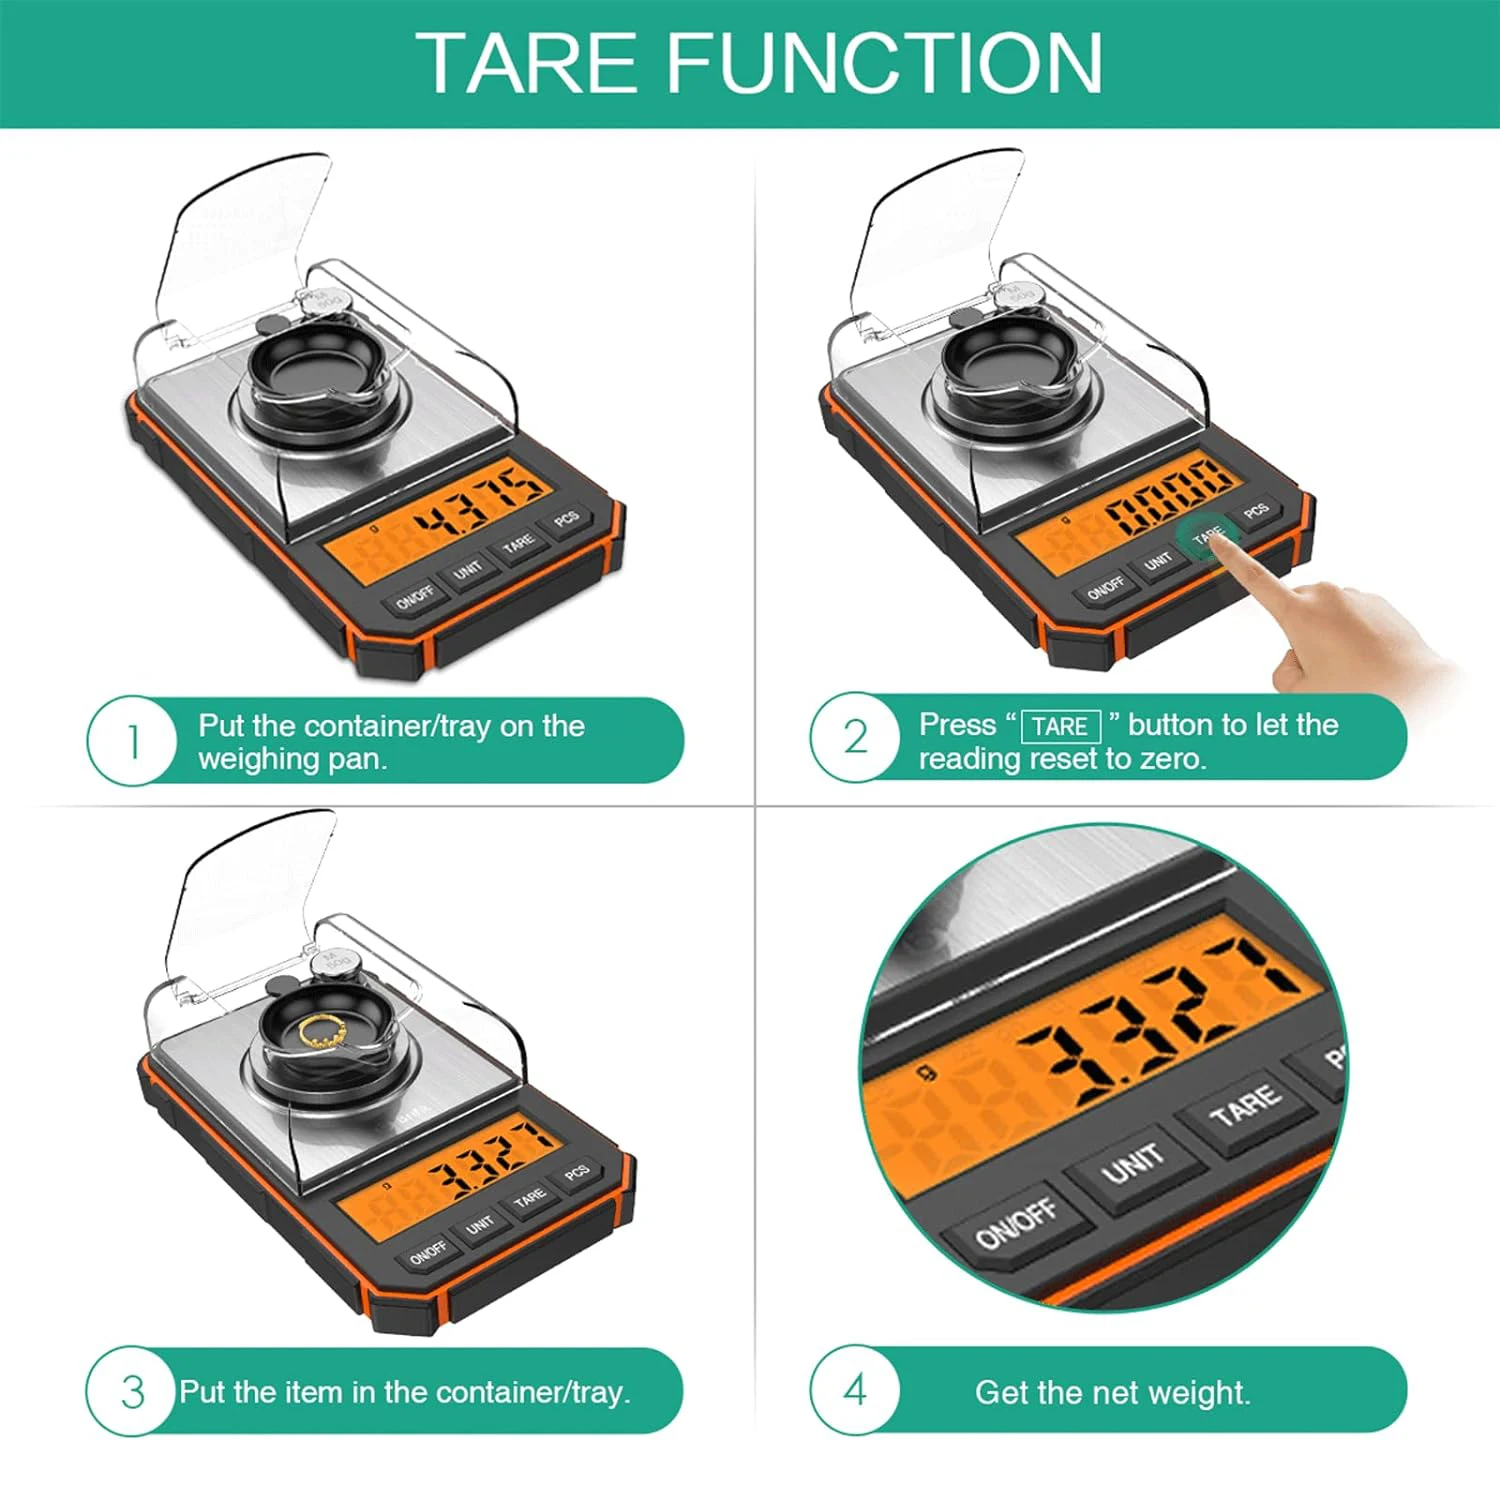 https://ae01.alicdn.com/kf/S21a6986eb24b4717b746e1060d5672feE/50g-Portable-Digital-Milligram-Scale-0-001g-Precise-Graduation-Professional-Pocket-Scale-with-50g-Calibration-Weights.jpg